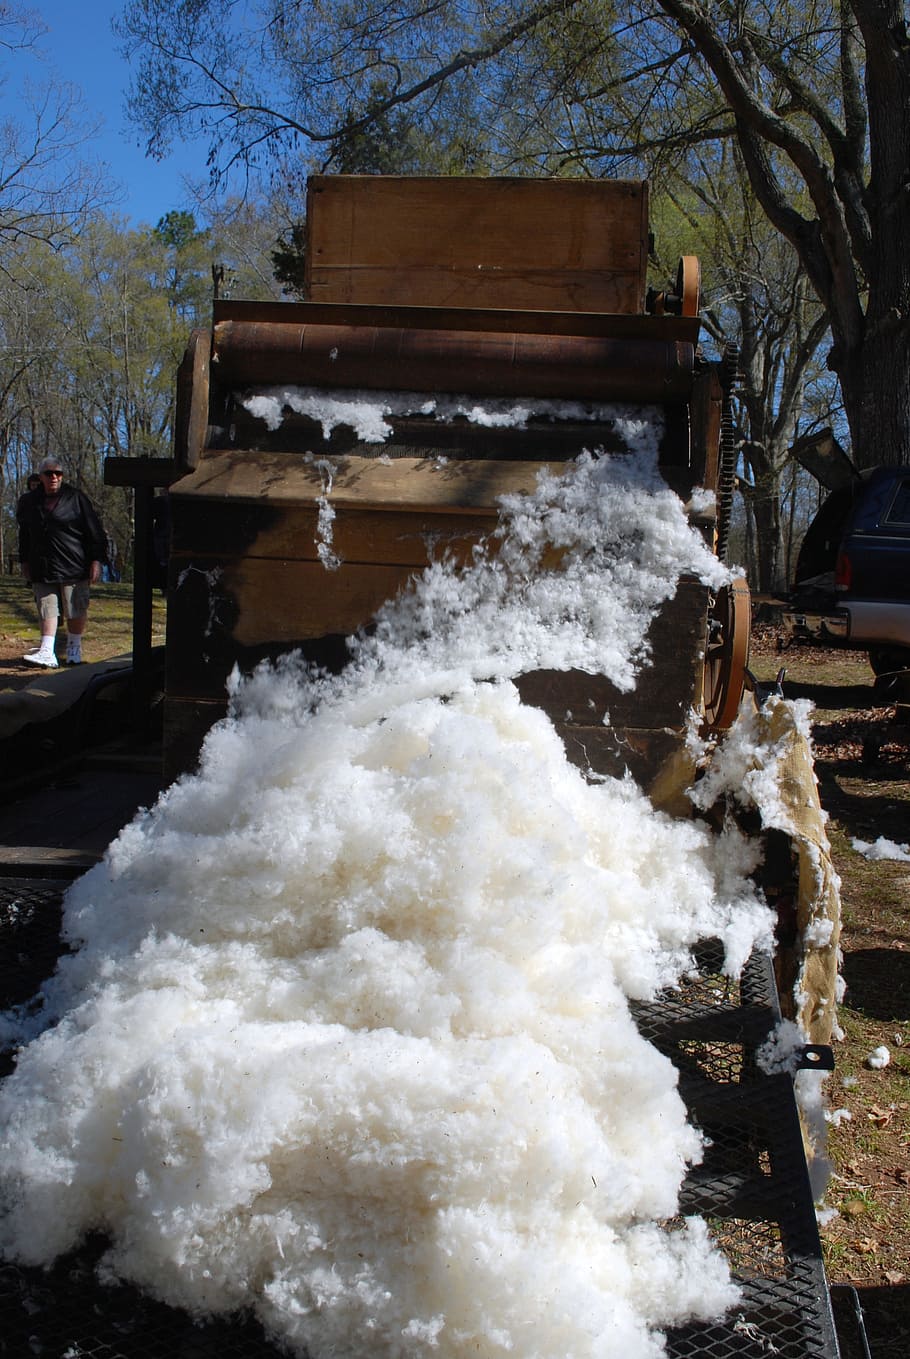 gin, cotton, cotton gin, plantation, agriculture, seed, southern, slavery, snow, winter